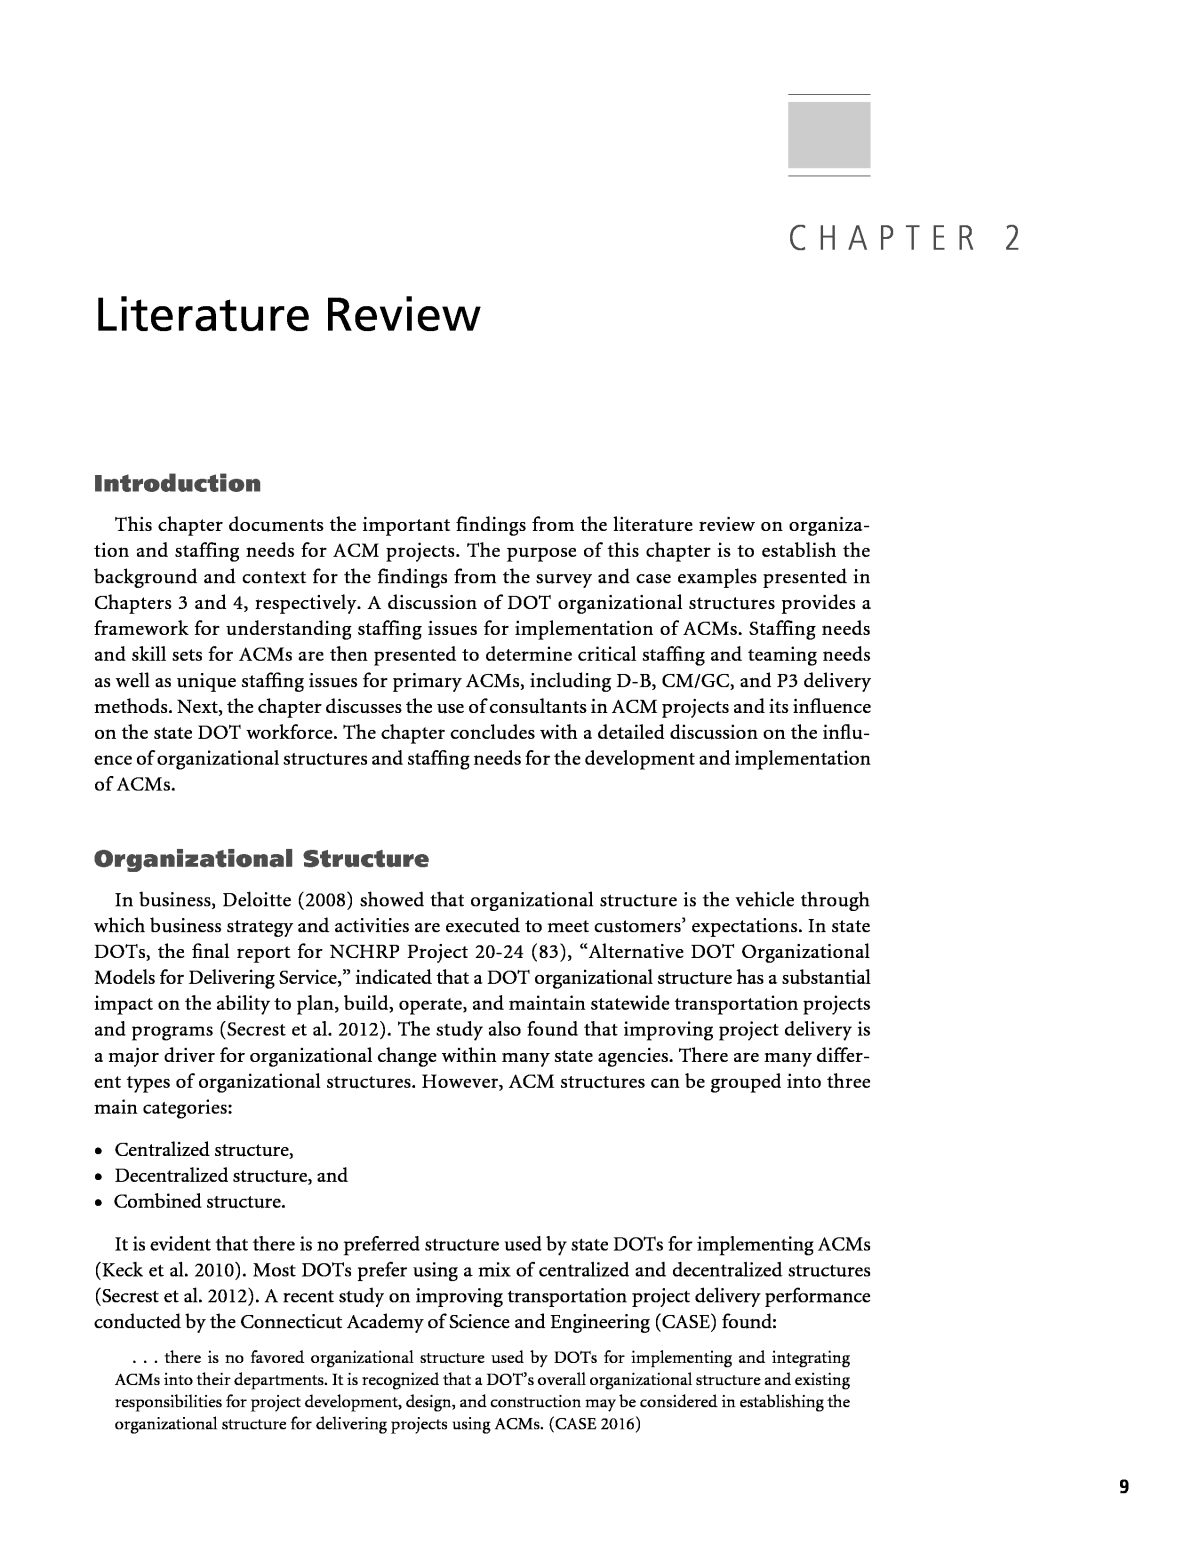 literature review chapter 2